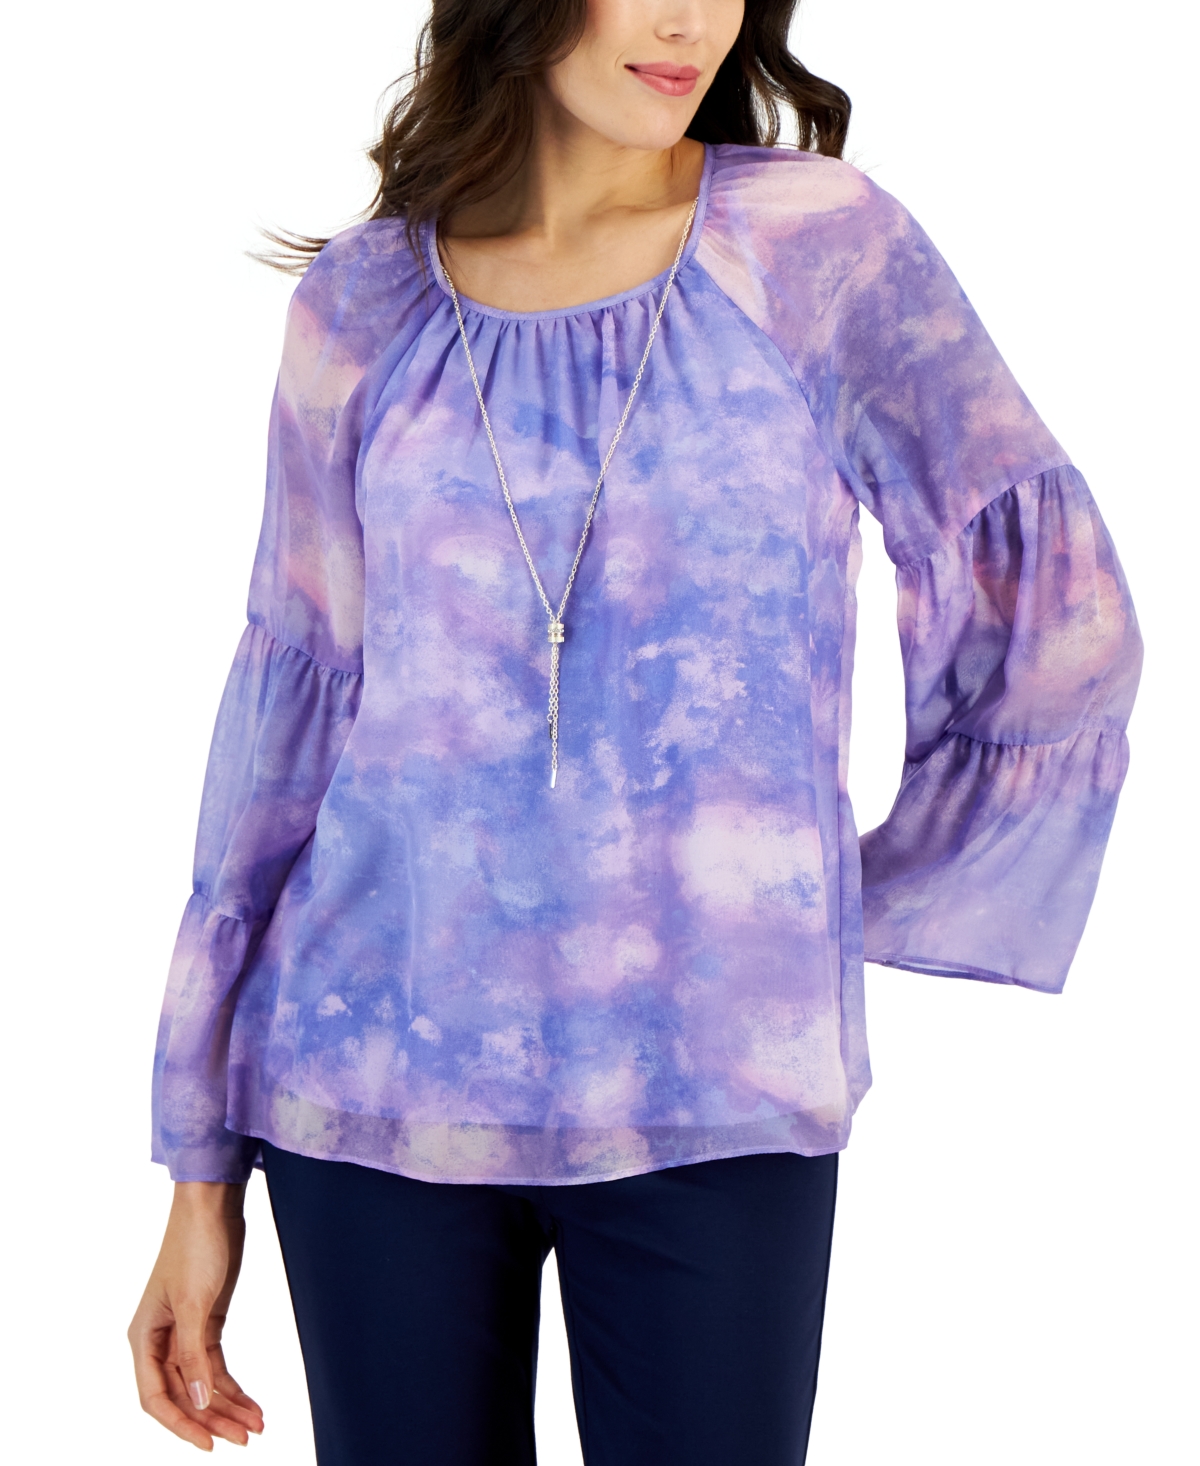 Women's New Year Tie-Dyed Necklace Top, Created for Macy's - Light Lavendar Combo